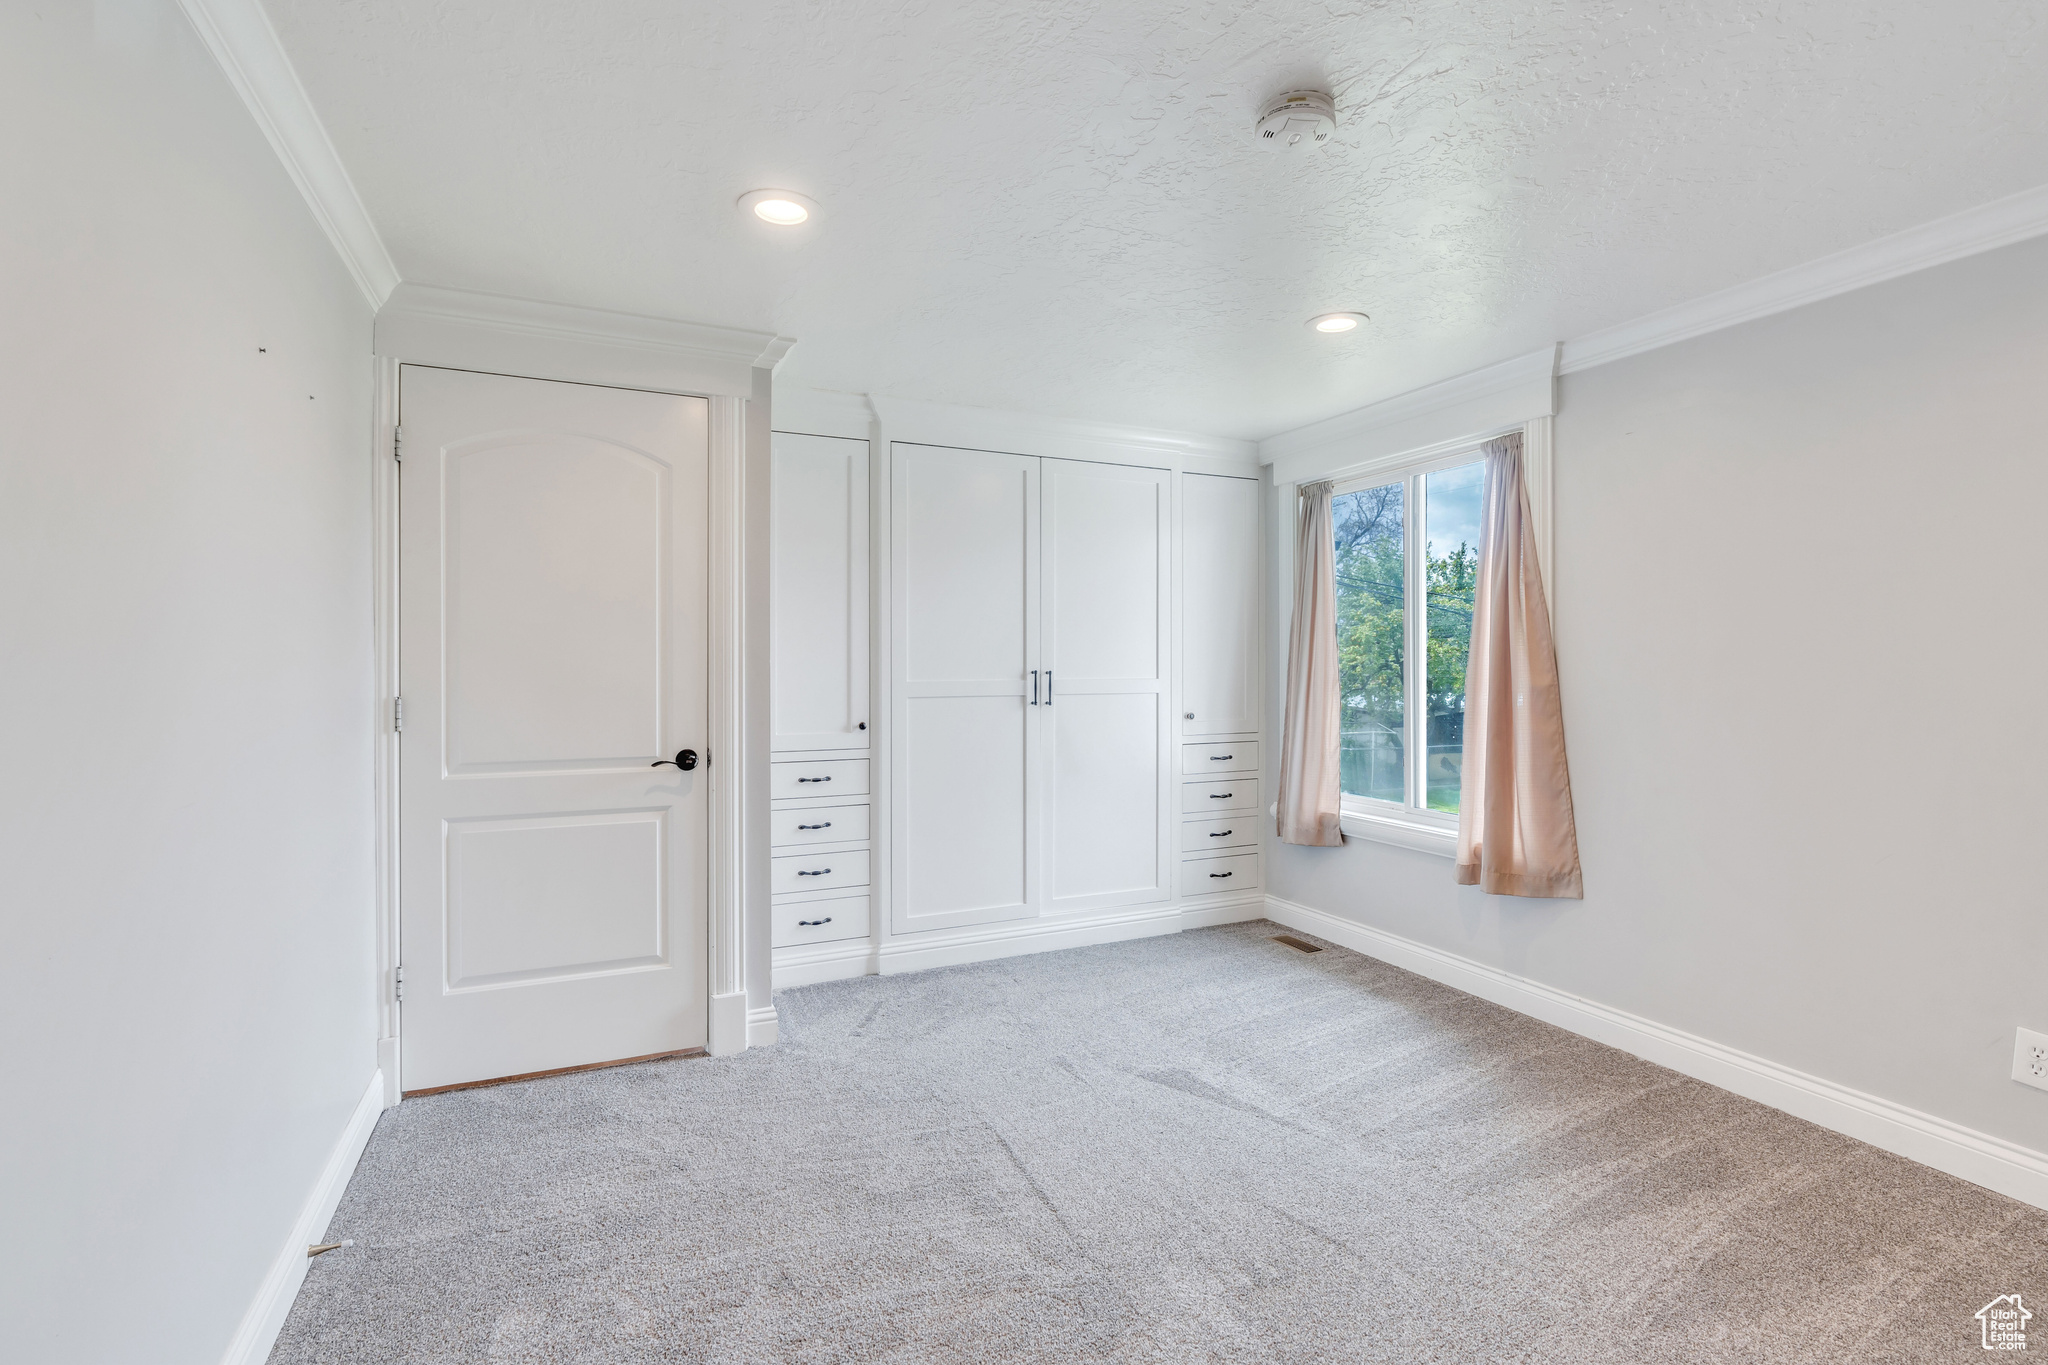 Unfurnished bedroom with crown molding and light colored carpet